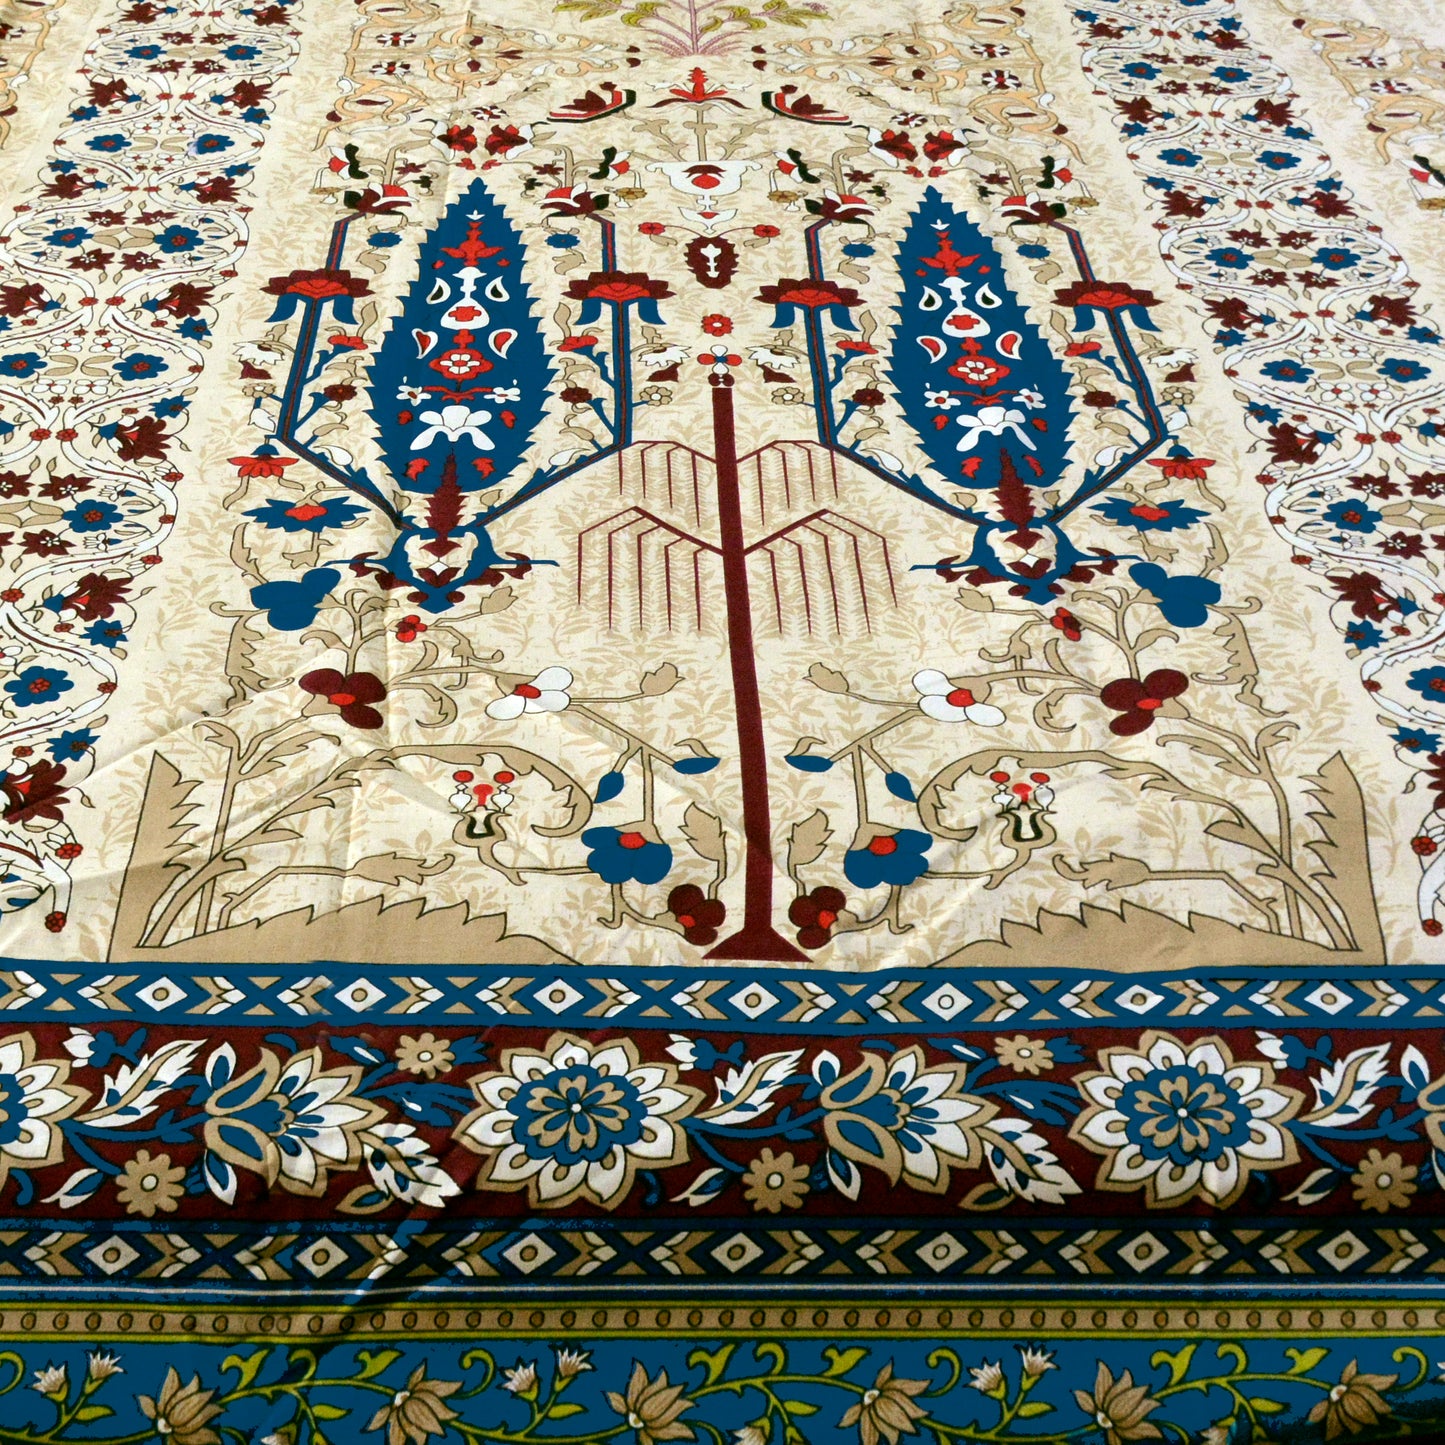 Mughal Motifs Bed Sheet With 2 Pillow Covers